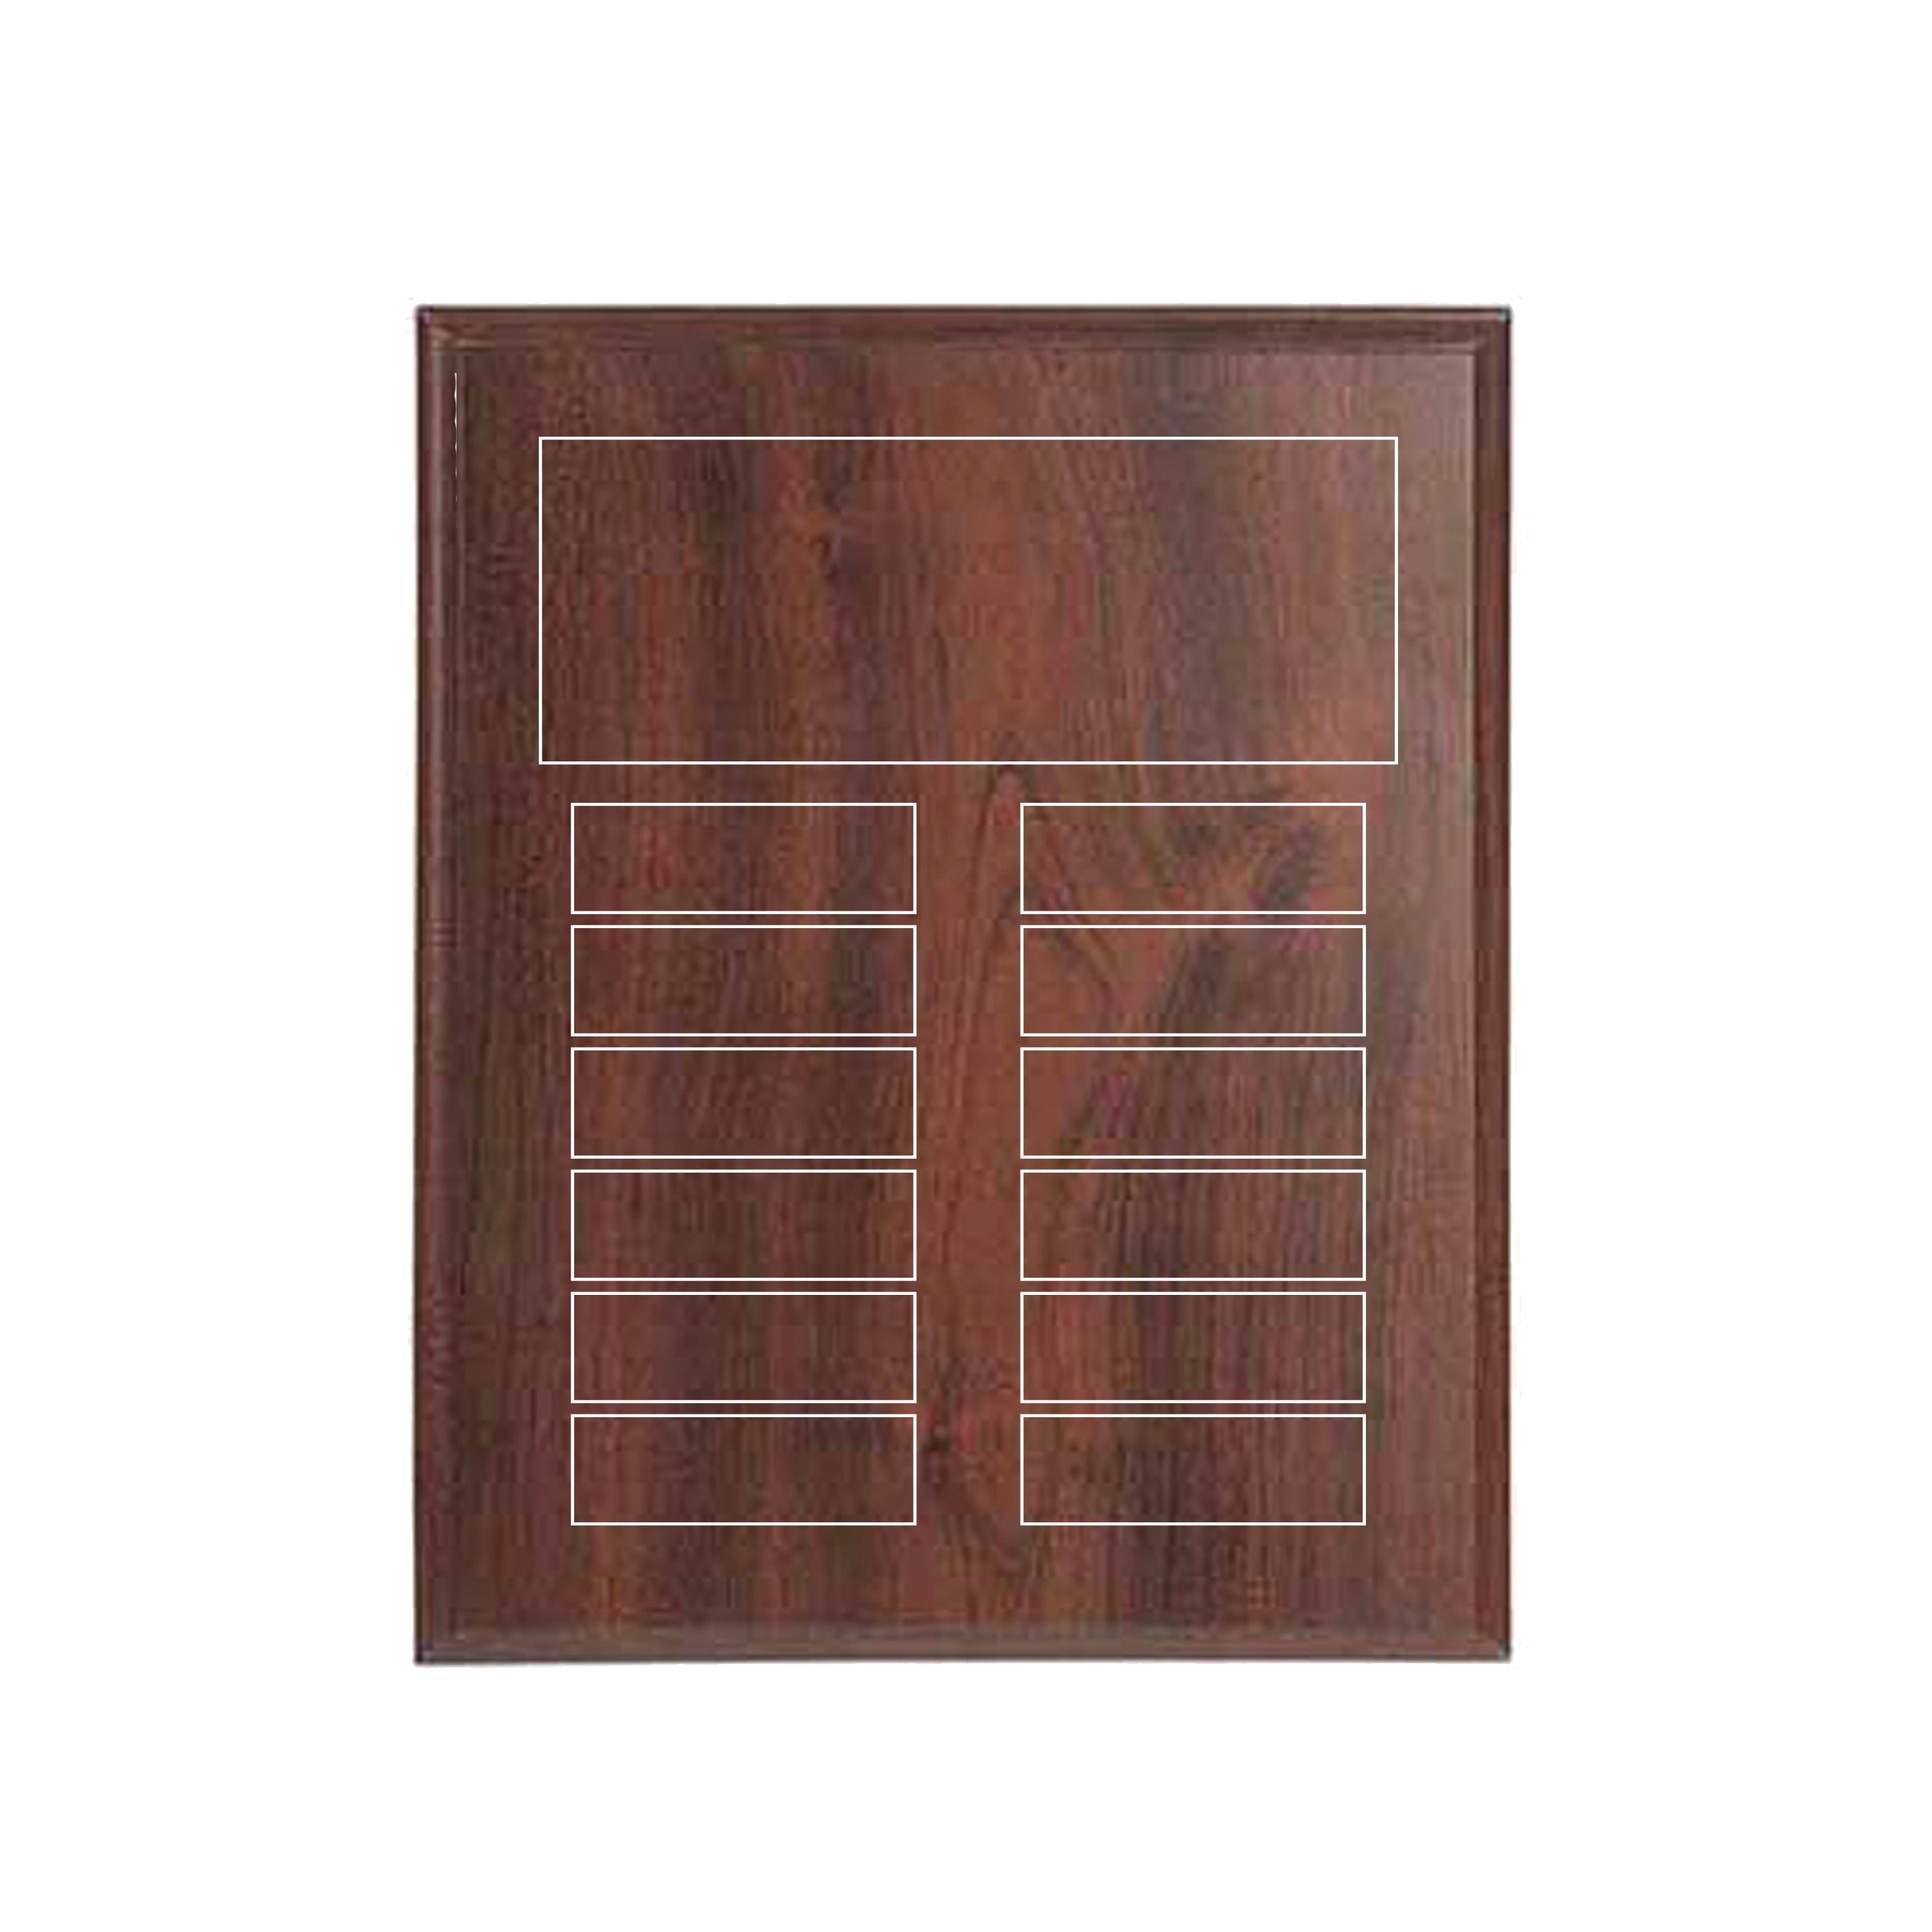 12 Plate Annual Award Plaque - Cherrywood Laminate - Nothers